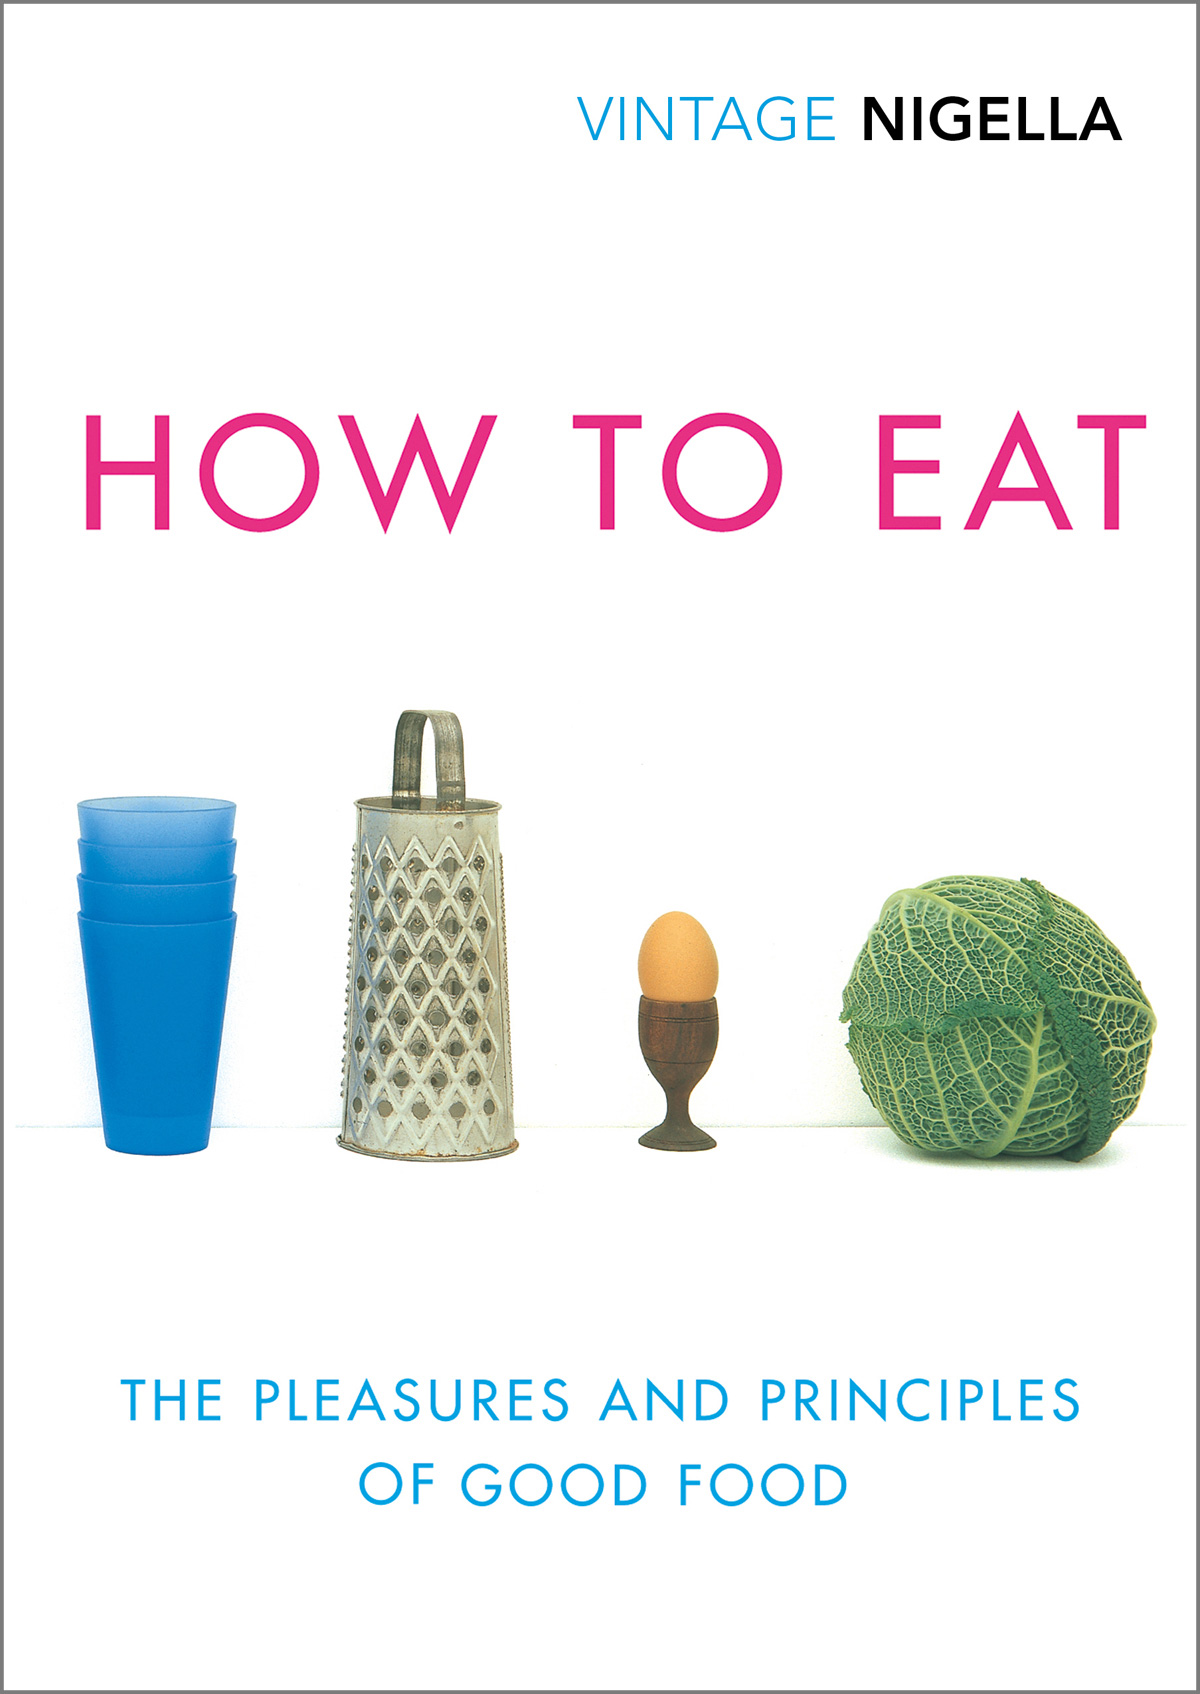 HOW TO EAT UK book cover